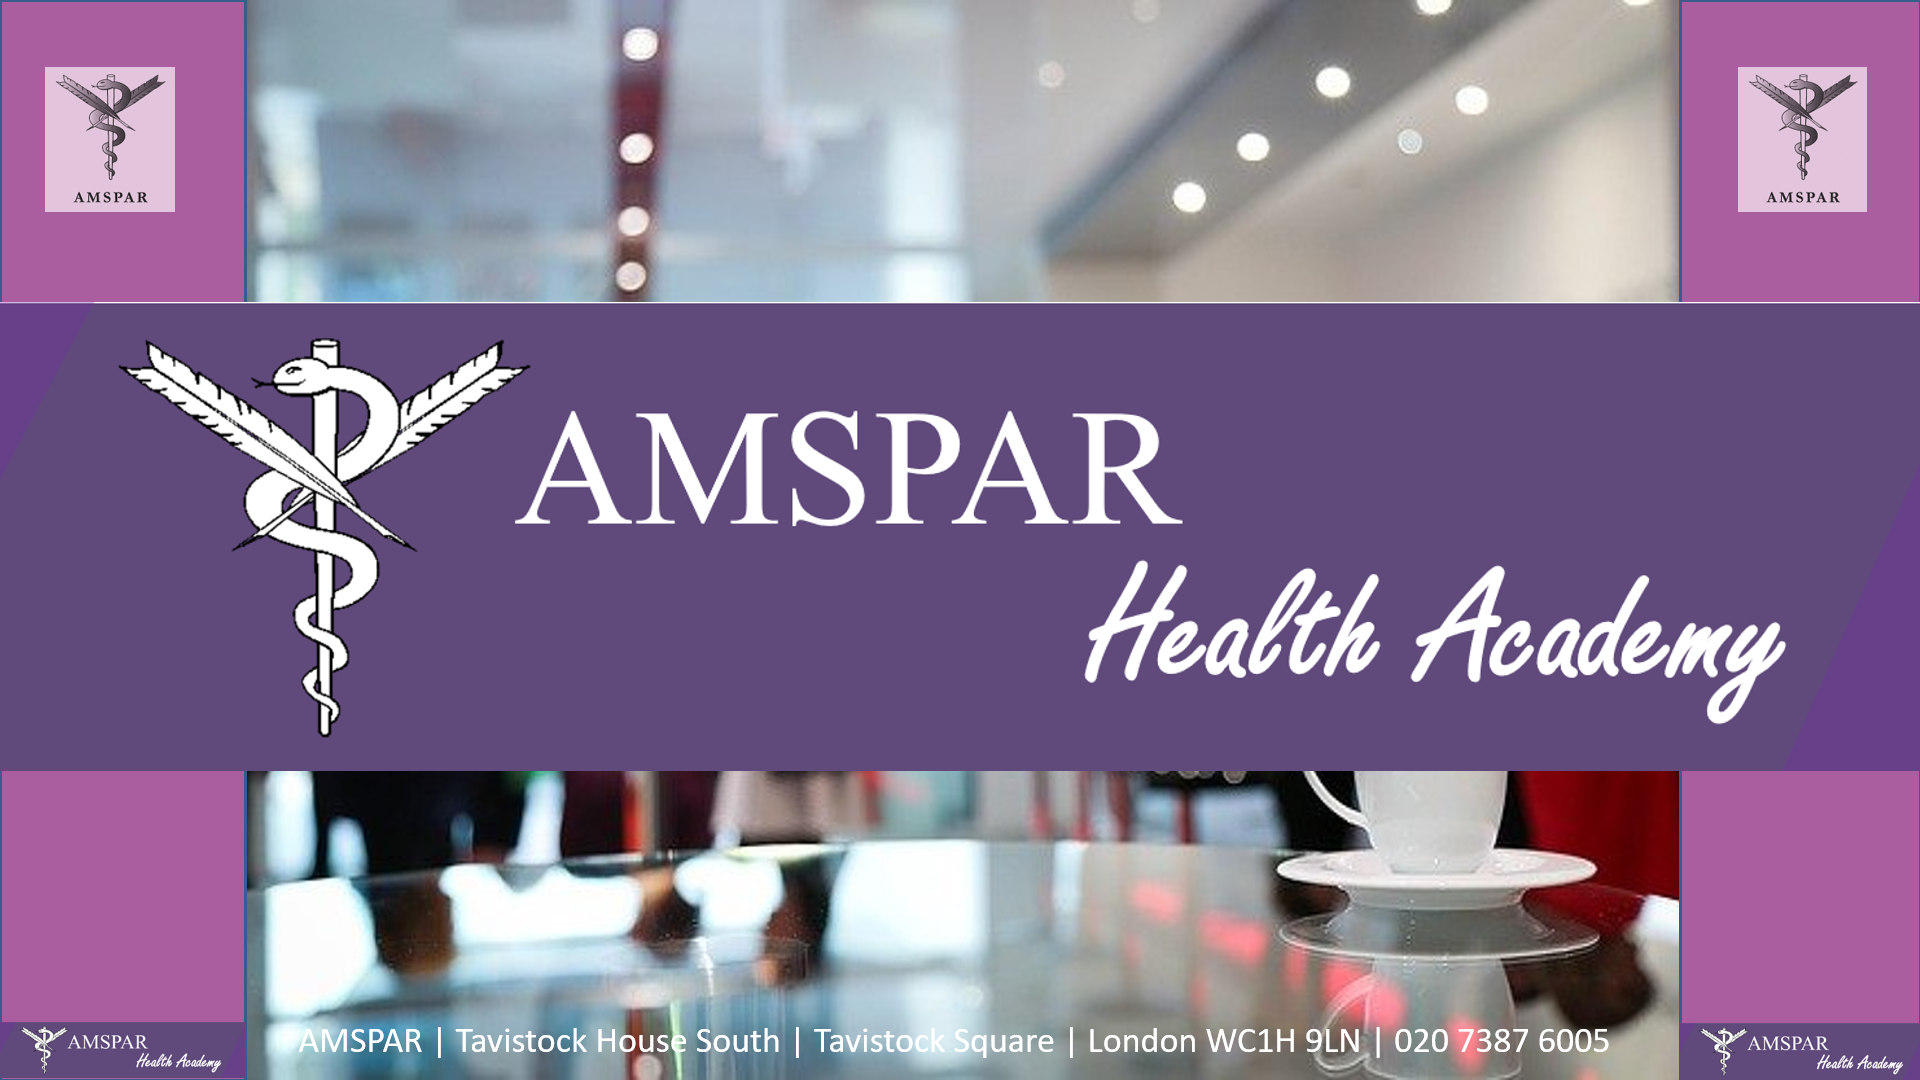 AMSPAR Approved Basic Introduction to Medical Terminology